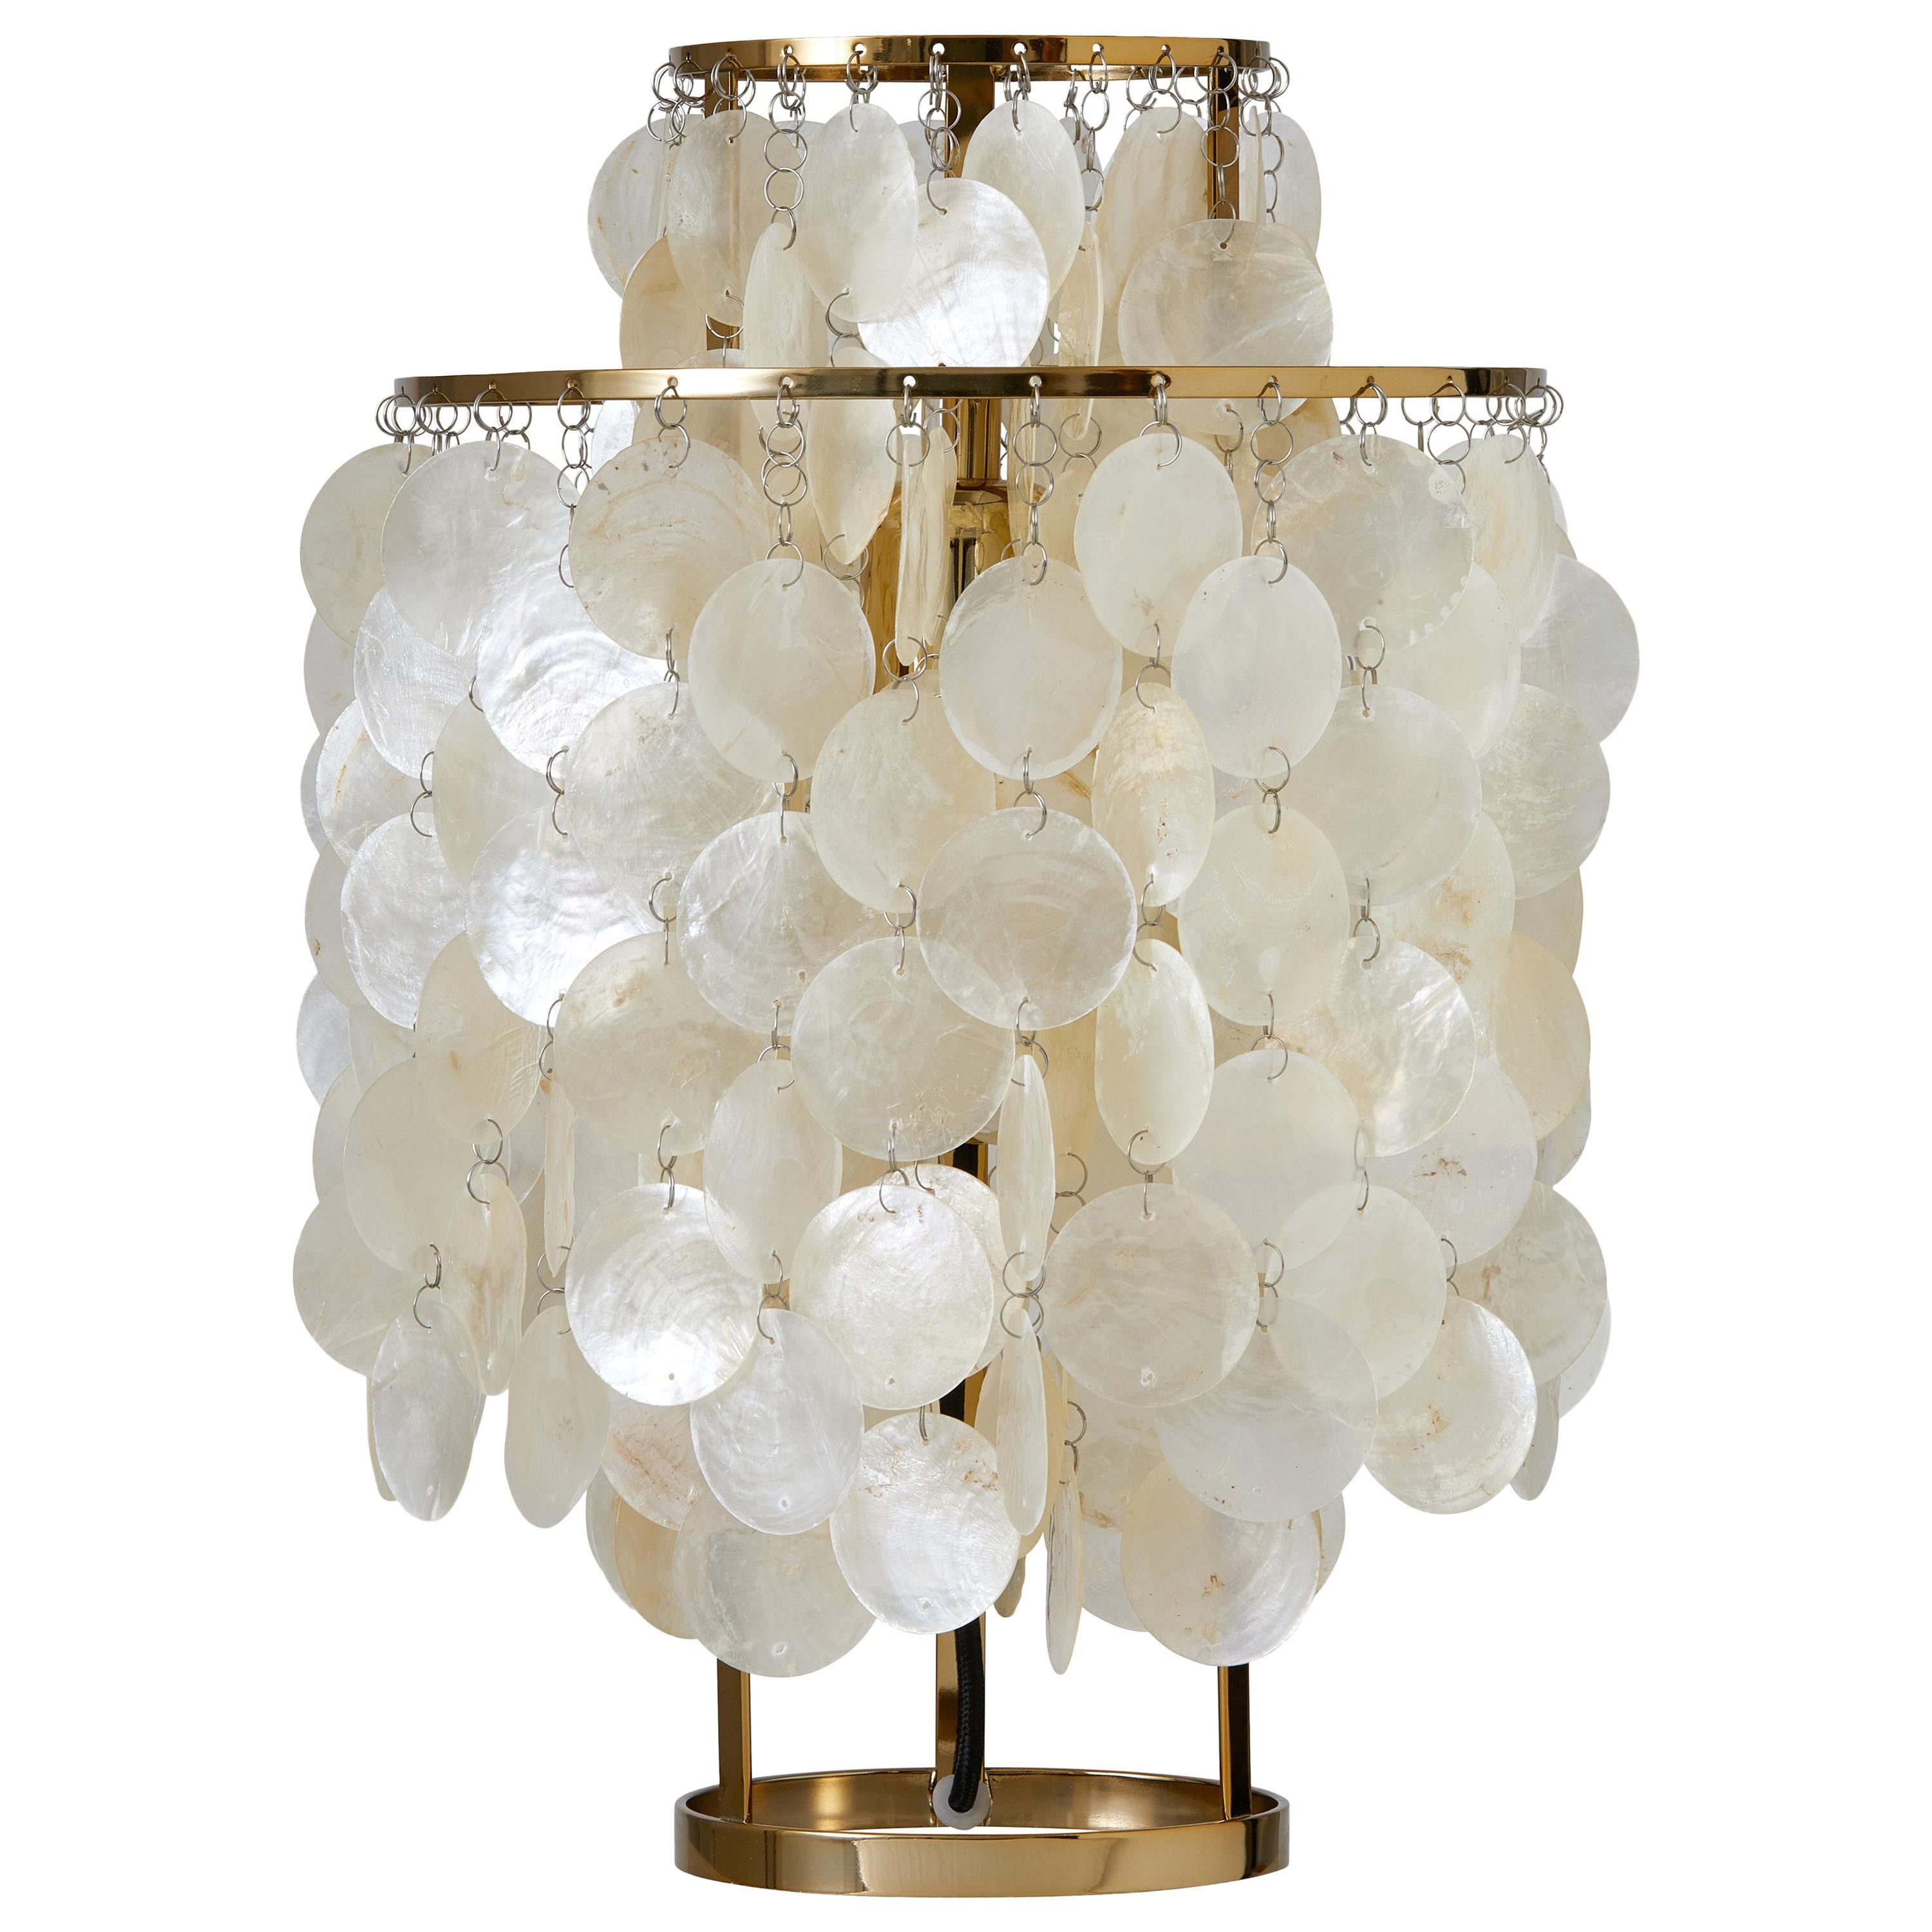 Fun 2TM Seashell Table Lamp with Brass Finish by Verner Panton